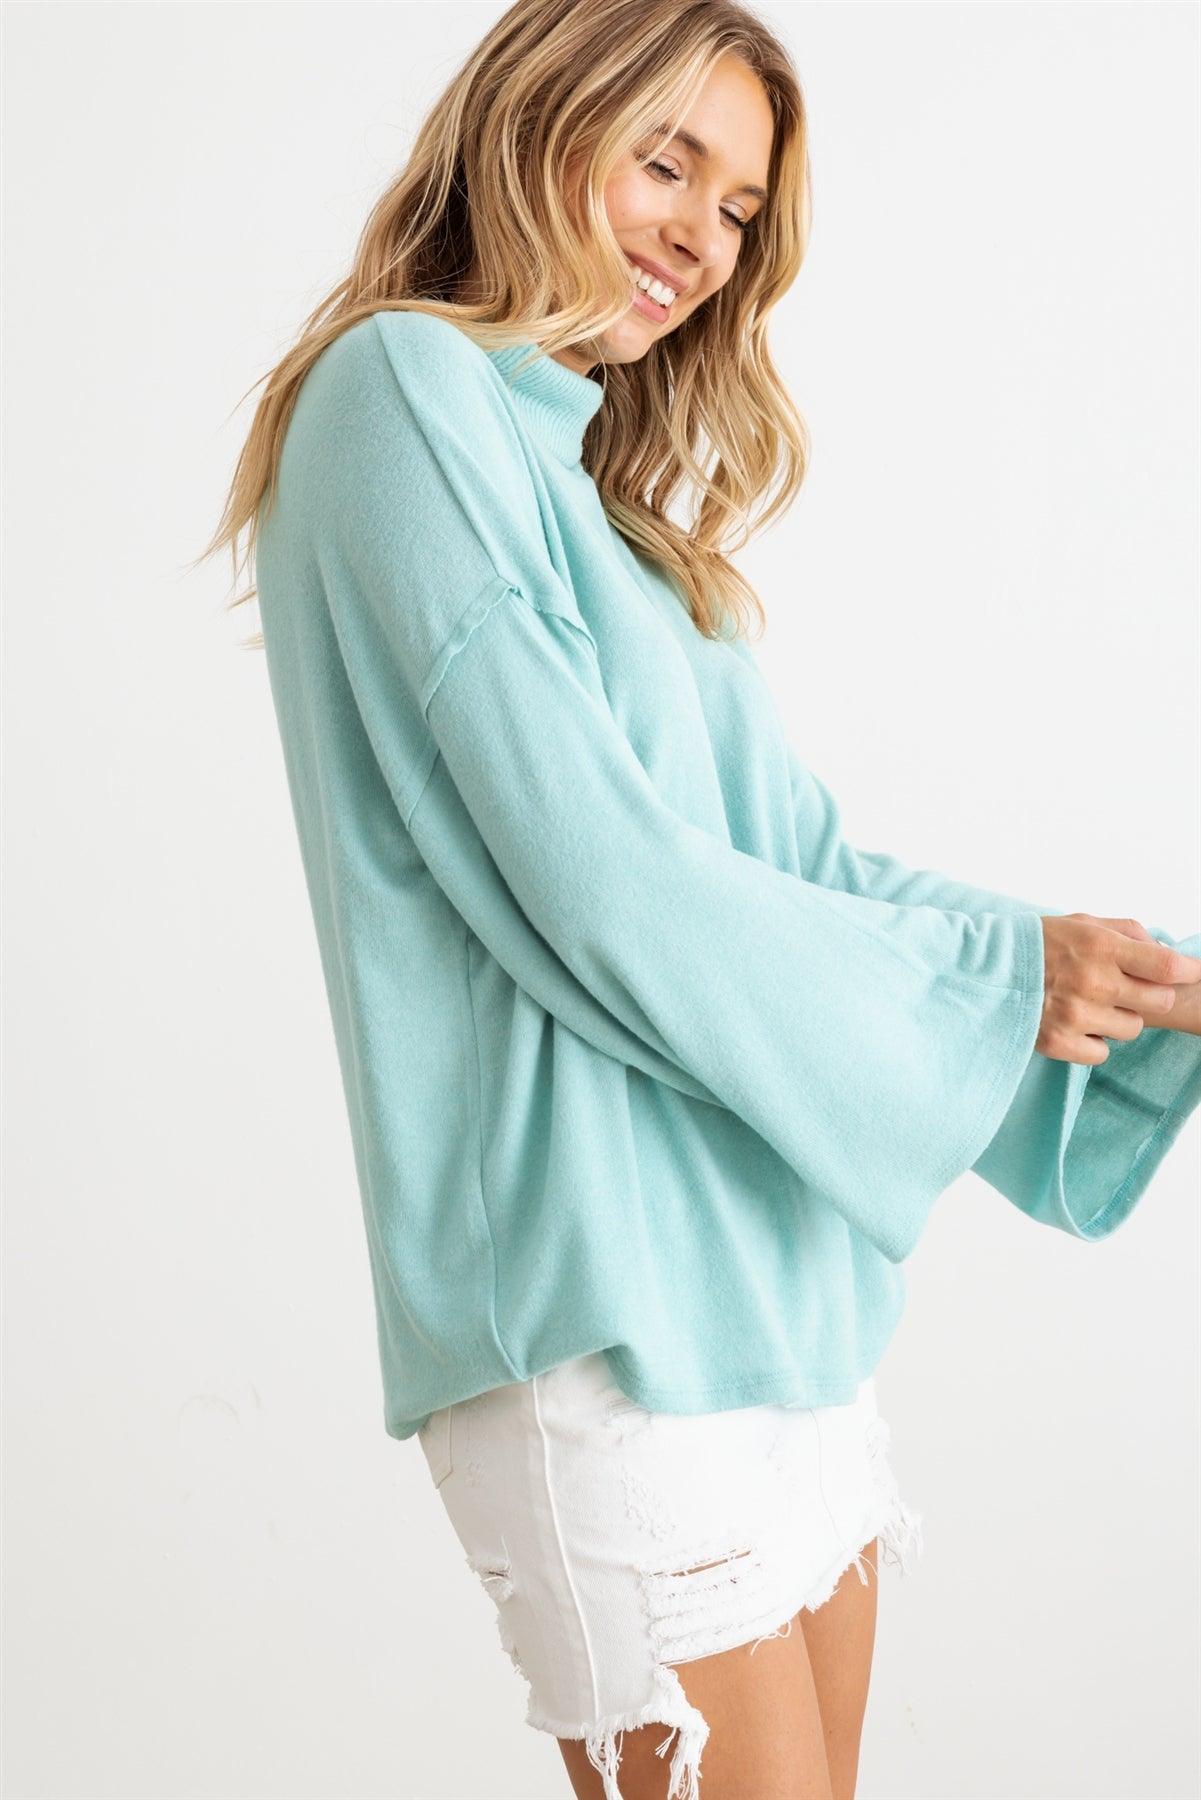 Aqua Turtle Neck Long Sleeve Soft To Touch Top 3